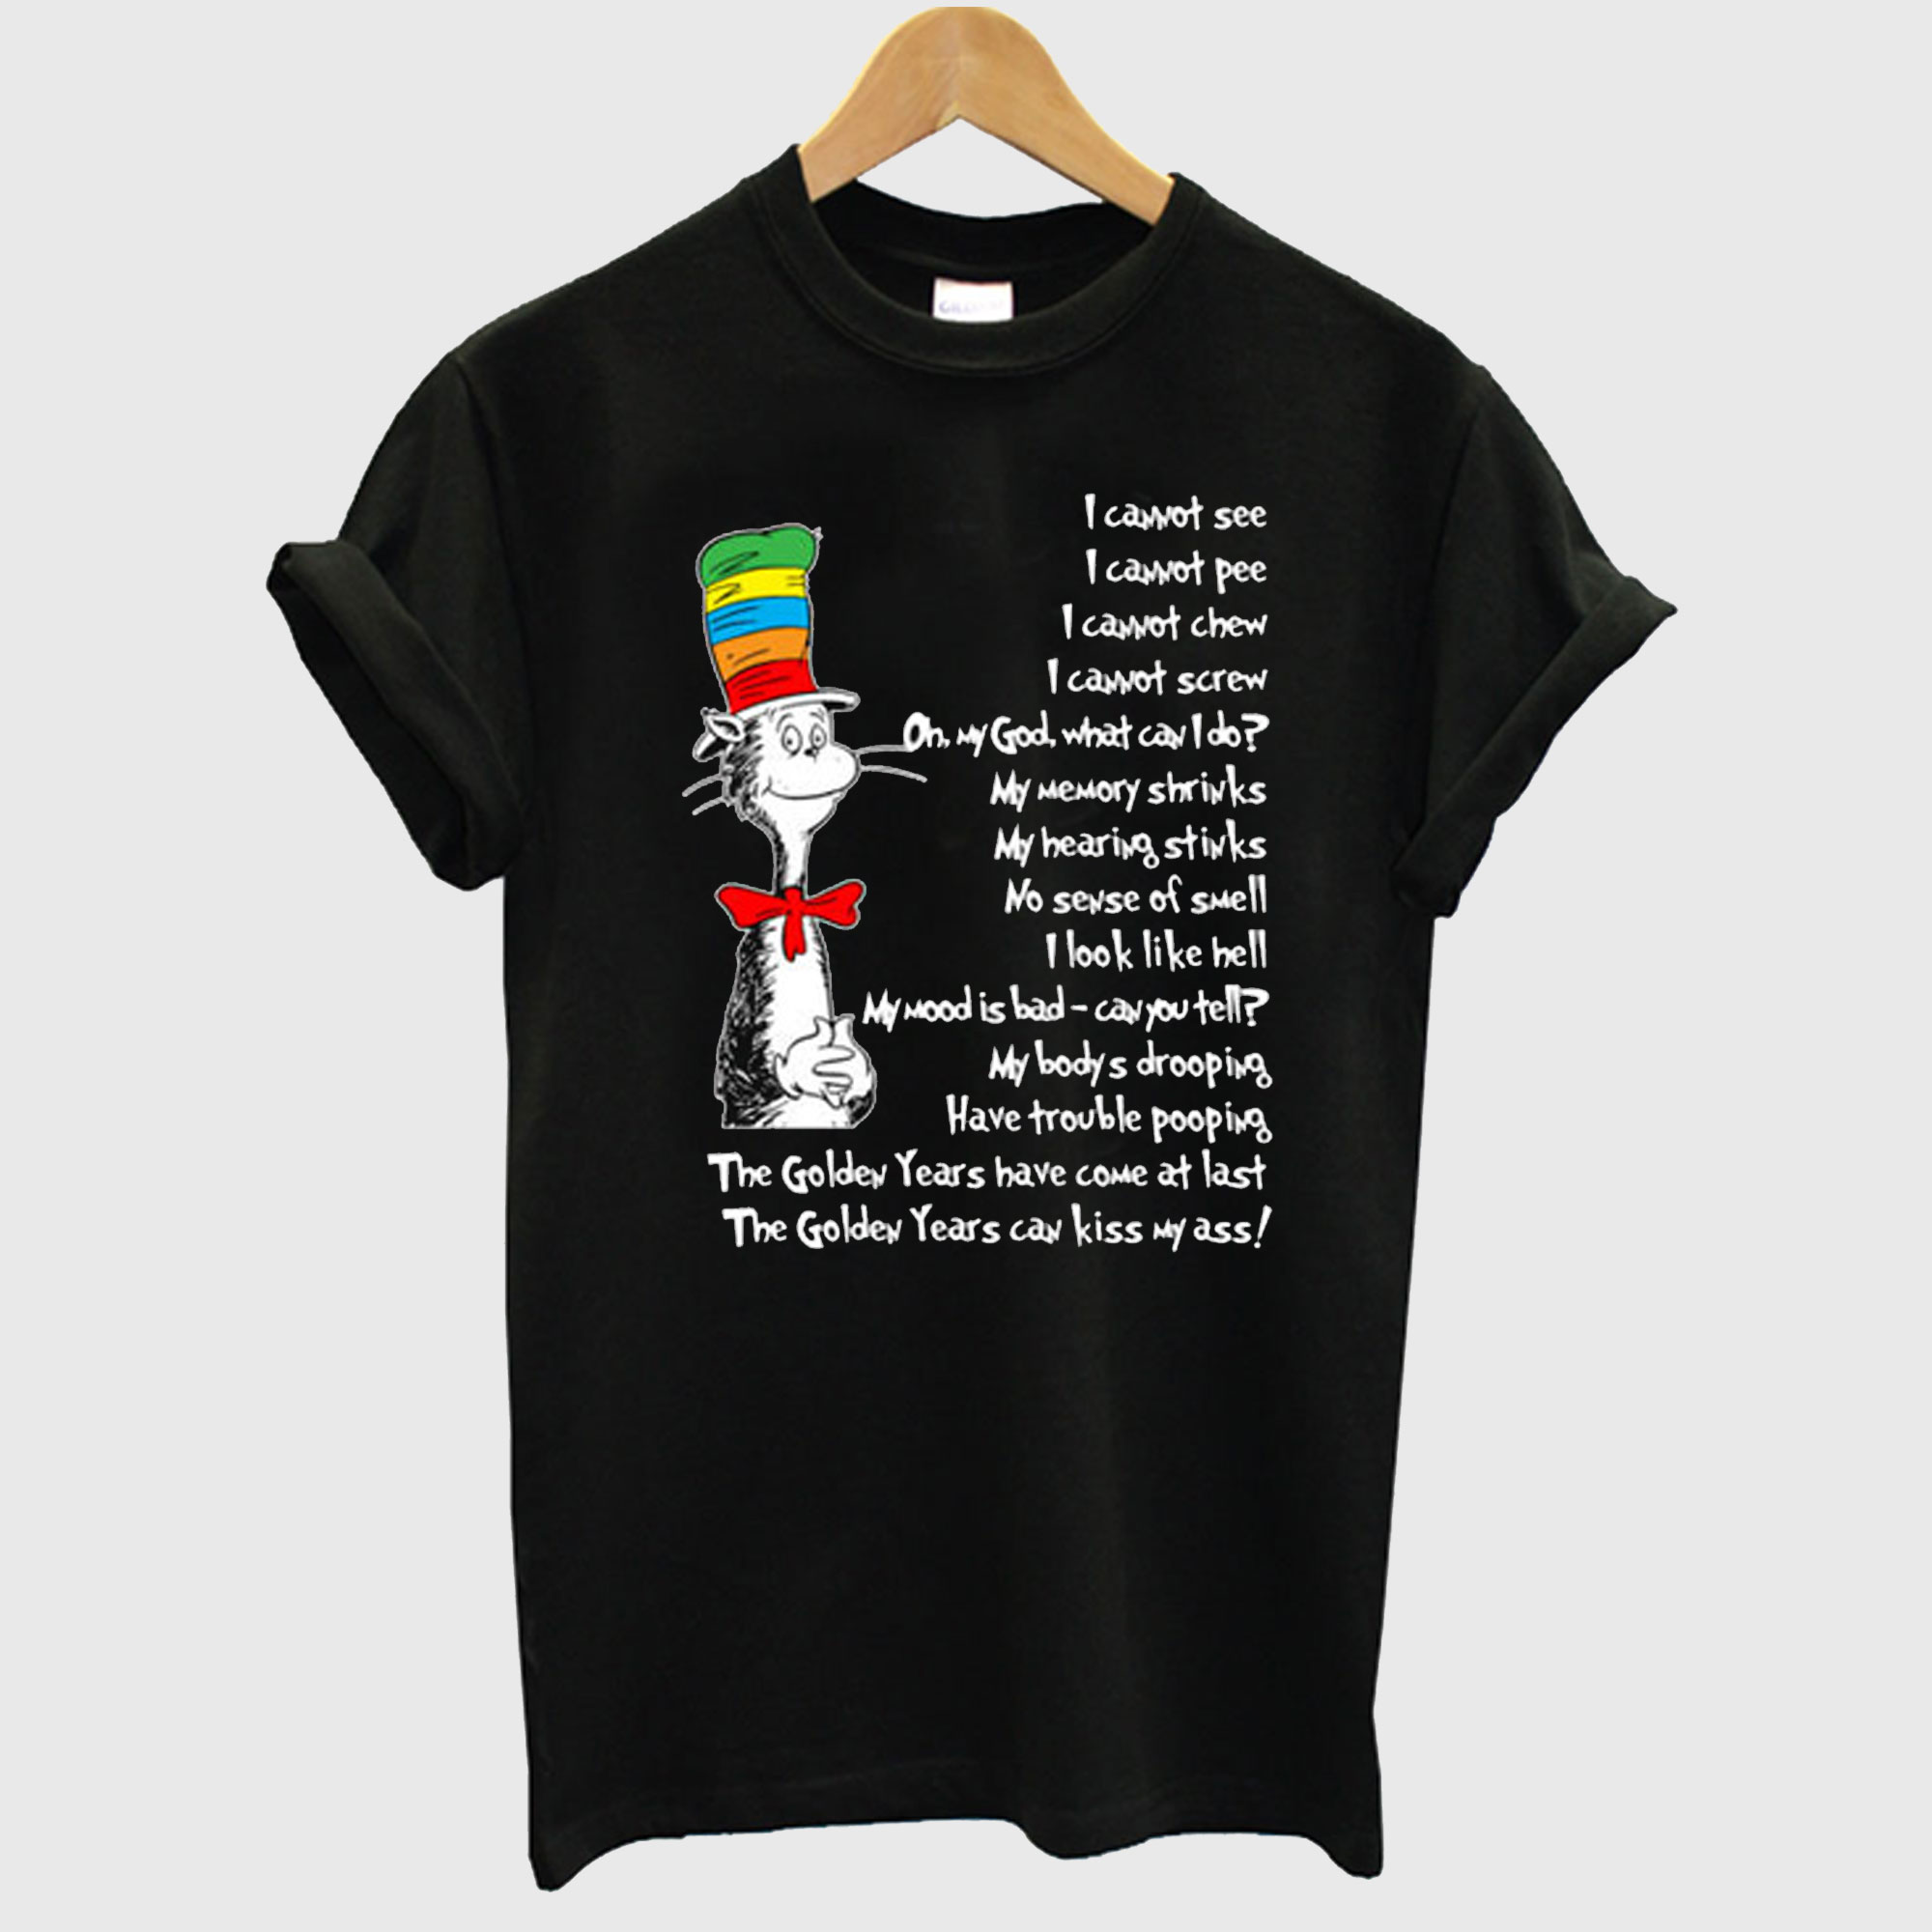 Dr. Seuss Parody On Aging The Golden Years T-Shirt